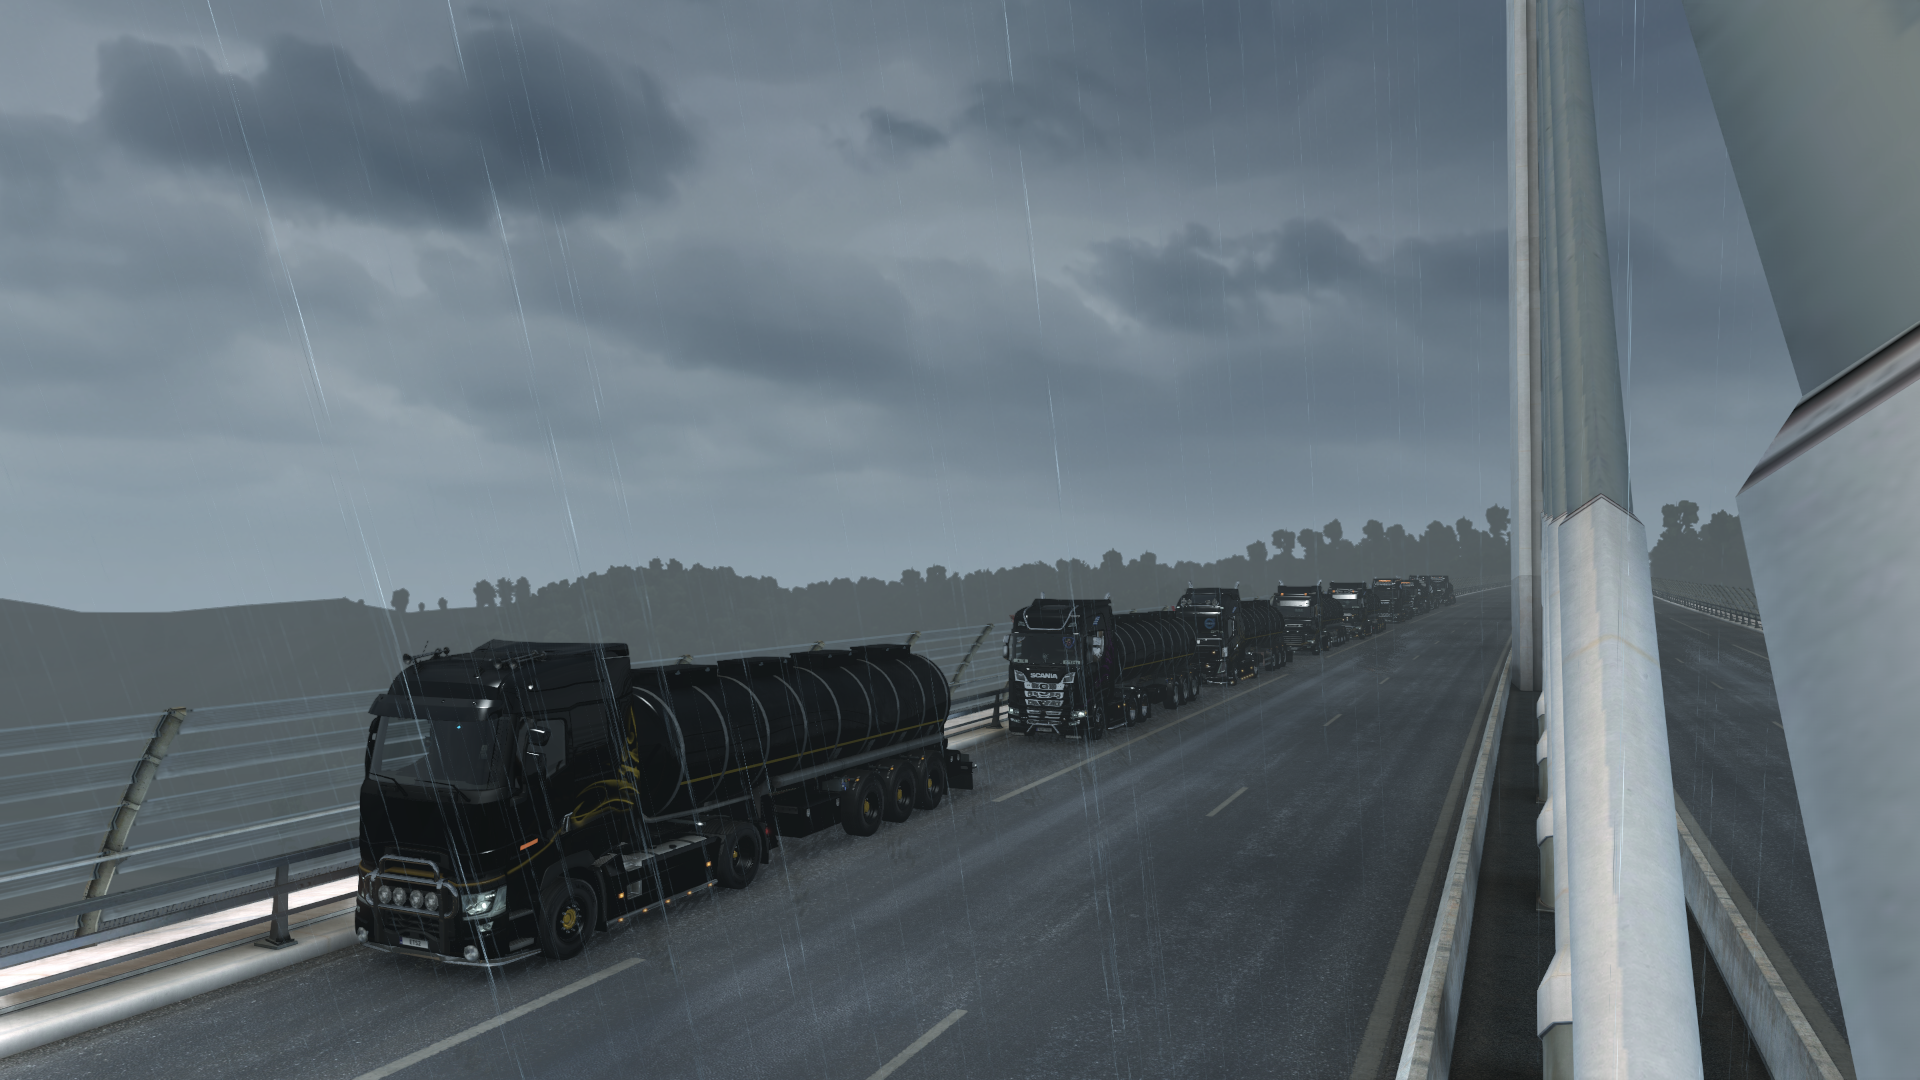 ets2_20210403_235844_00.png